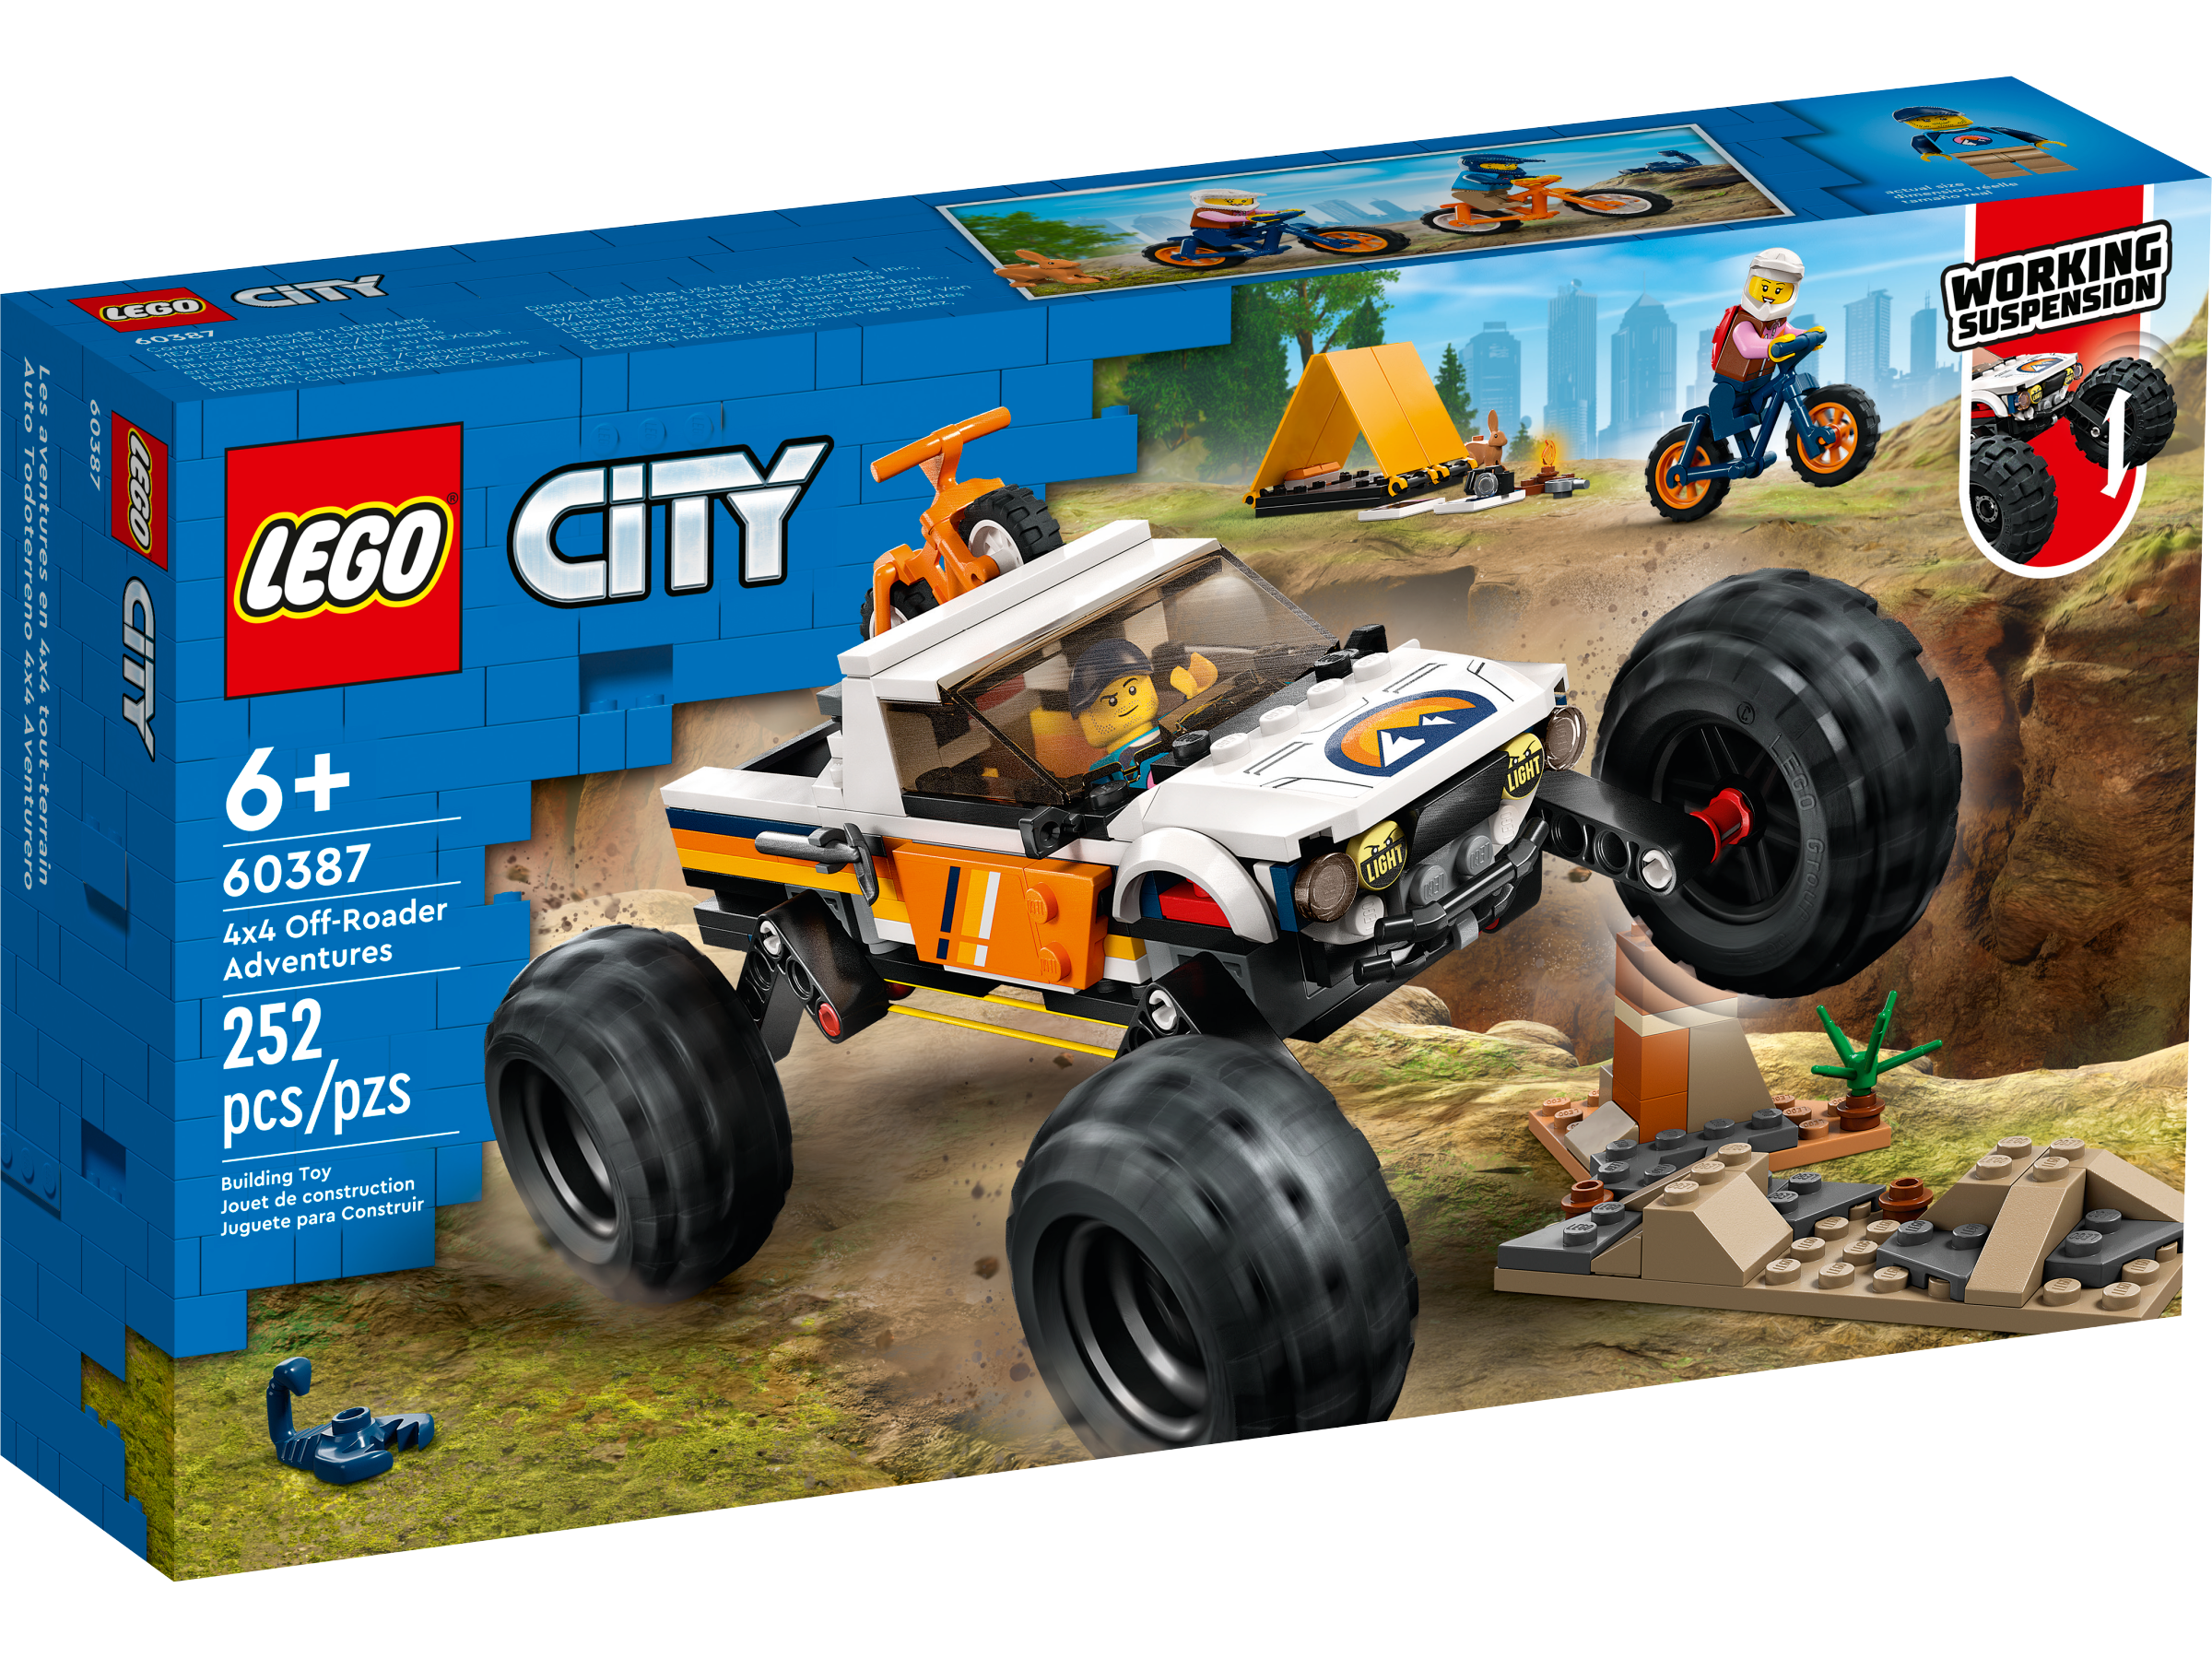 4x4 Off-Roader Adventures 60387 | City | Buy online at the 